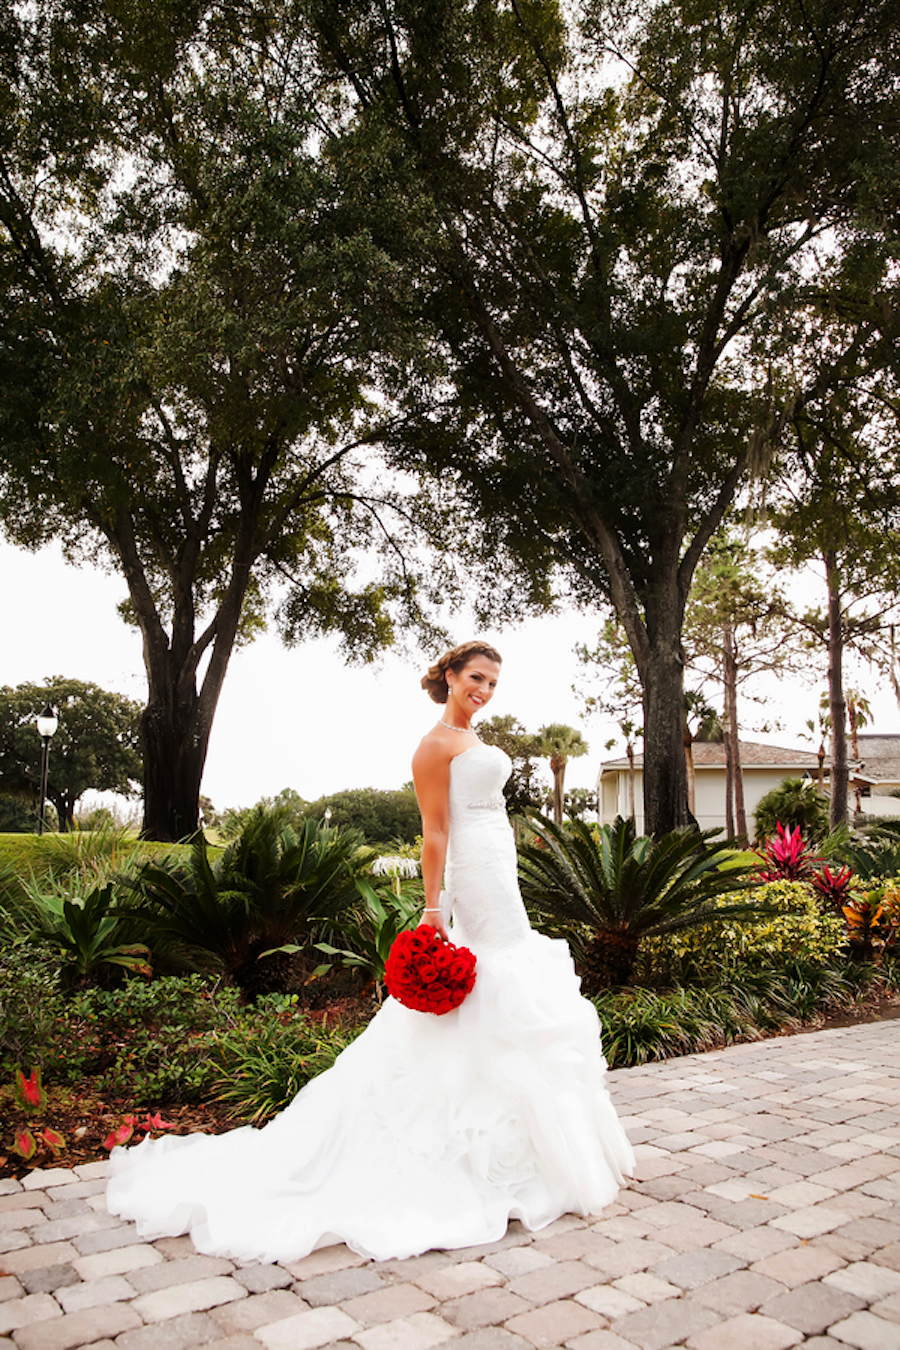 Bridal Wedding Day Portrait with Red Rose Bouquet | Photo by Tampa Bay Wedding Photographer Limelight Photography